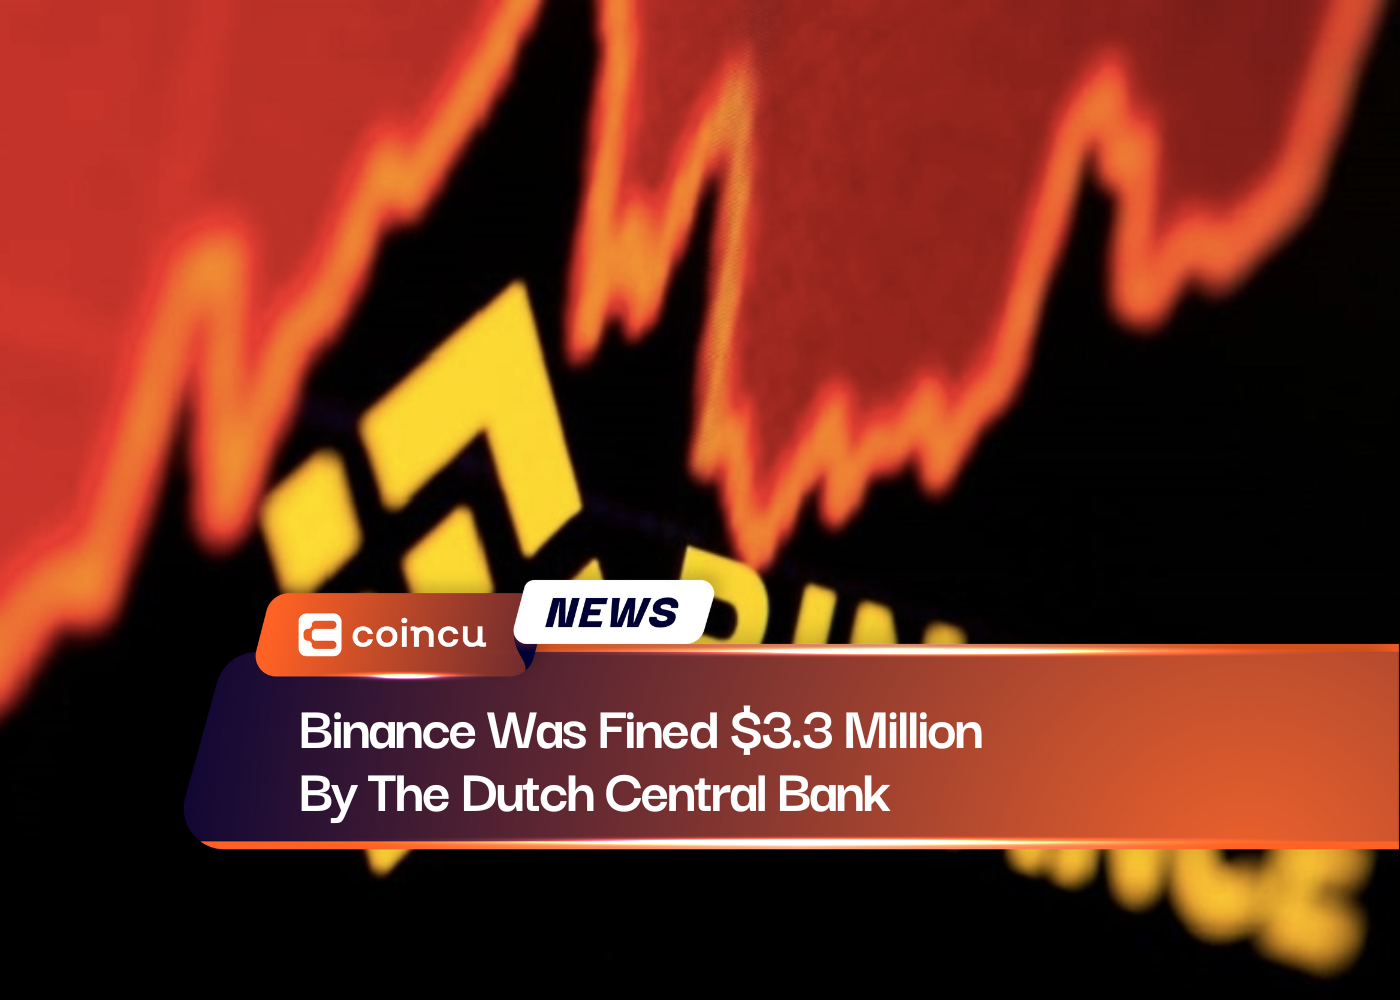 Binance Was Fined $3.3 Million By The Dutch Central Bank